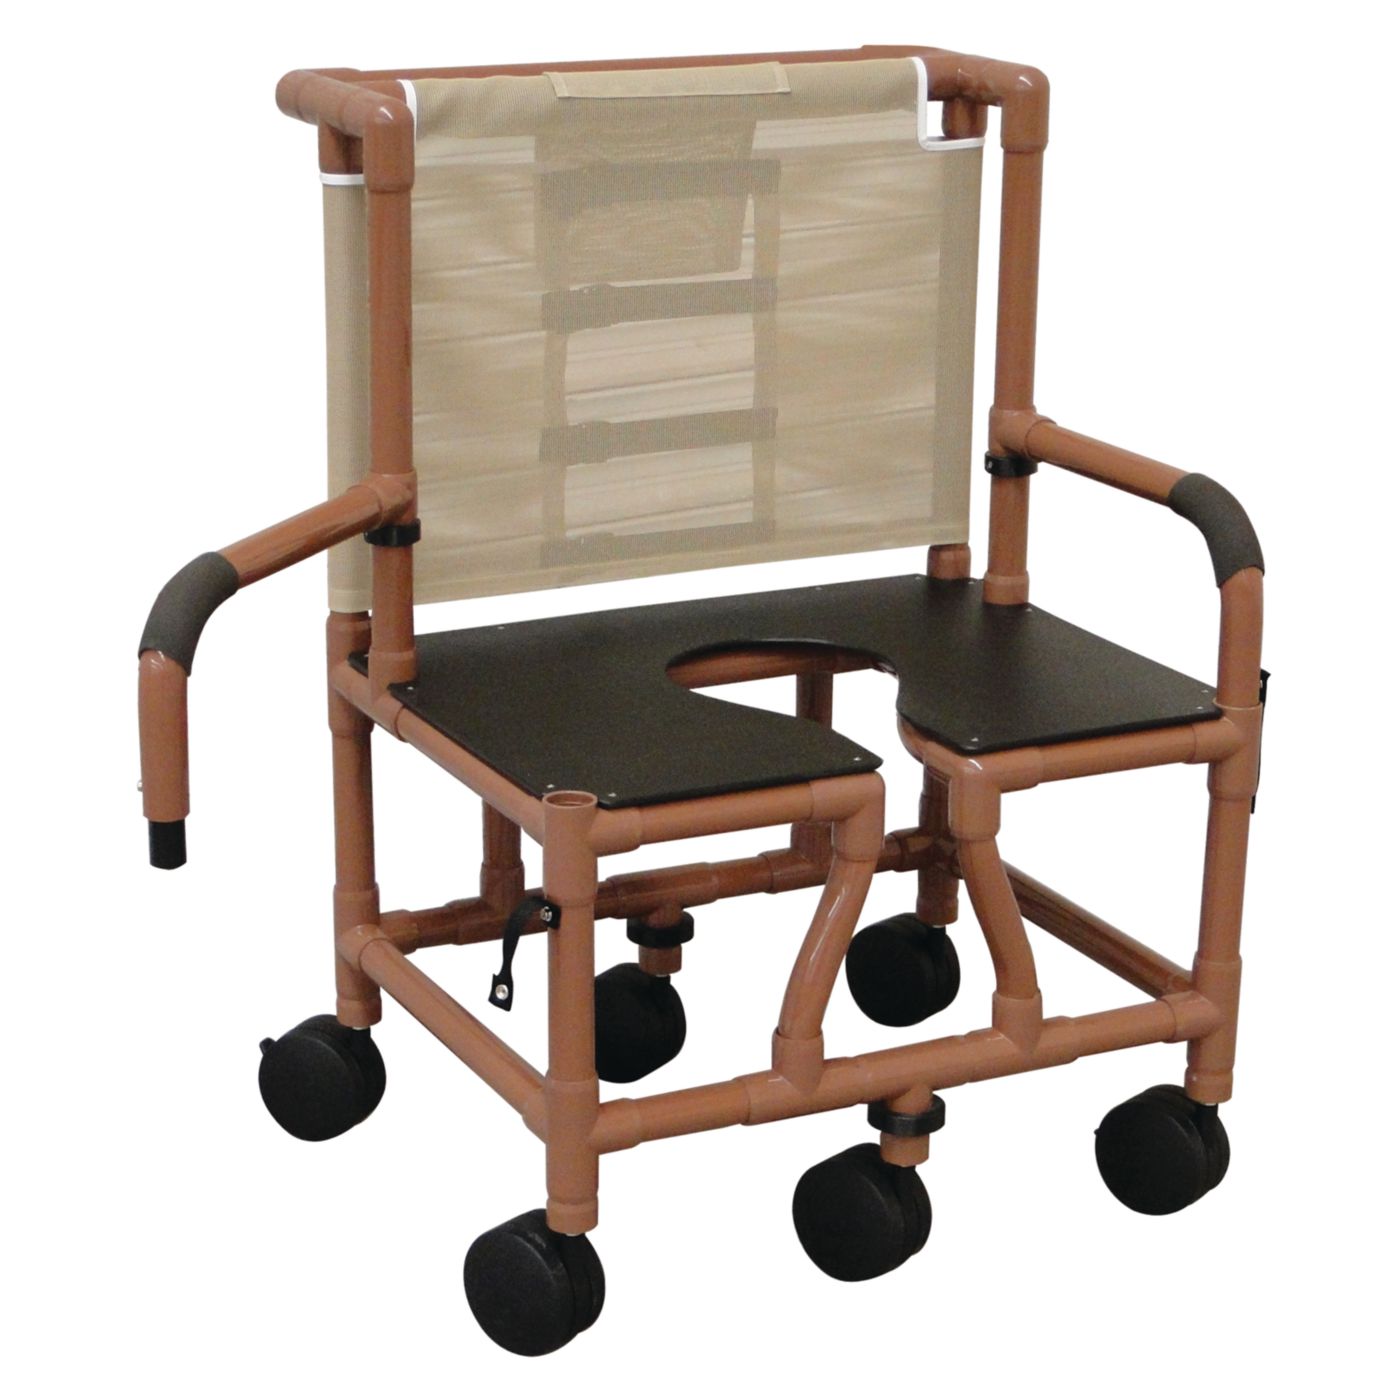 Woodlands Bariatric Shower Chair